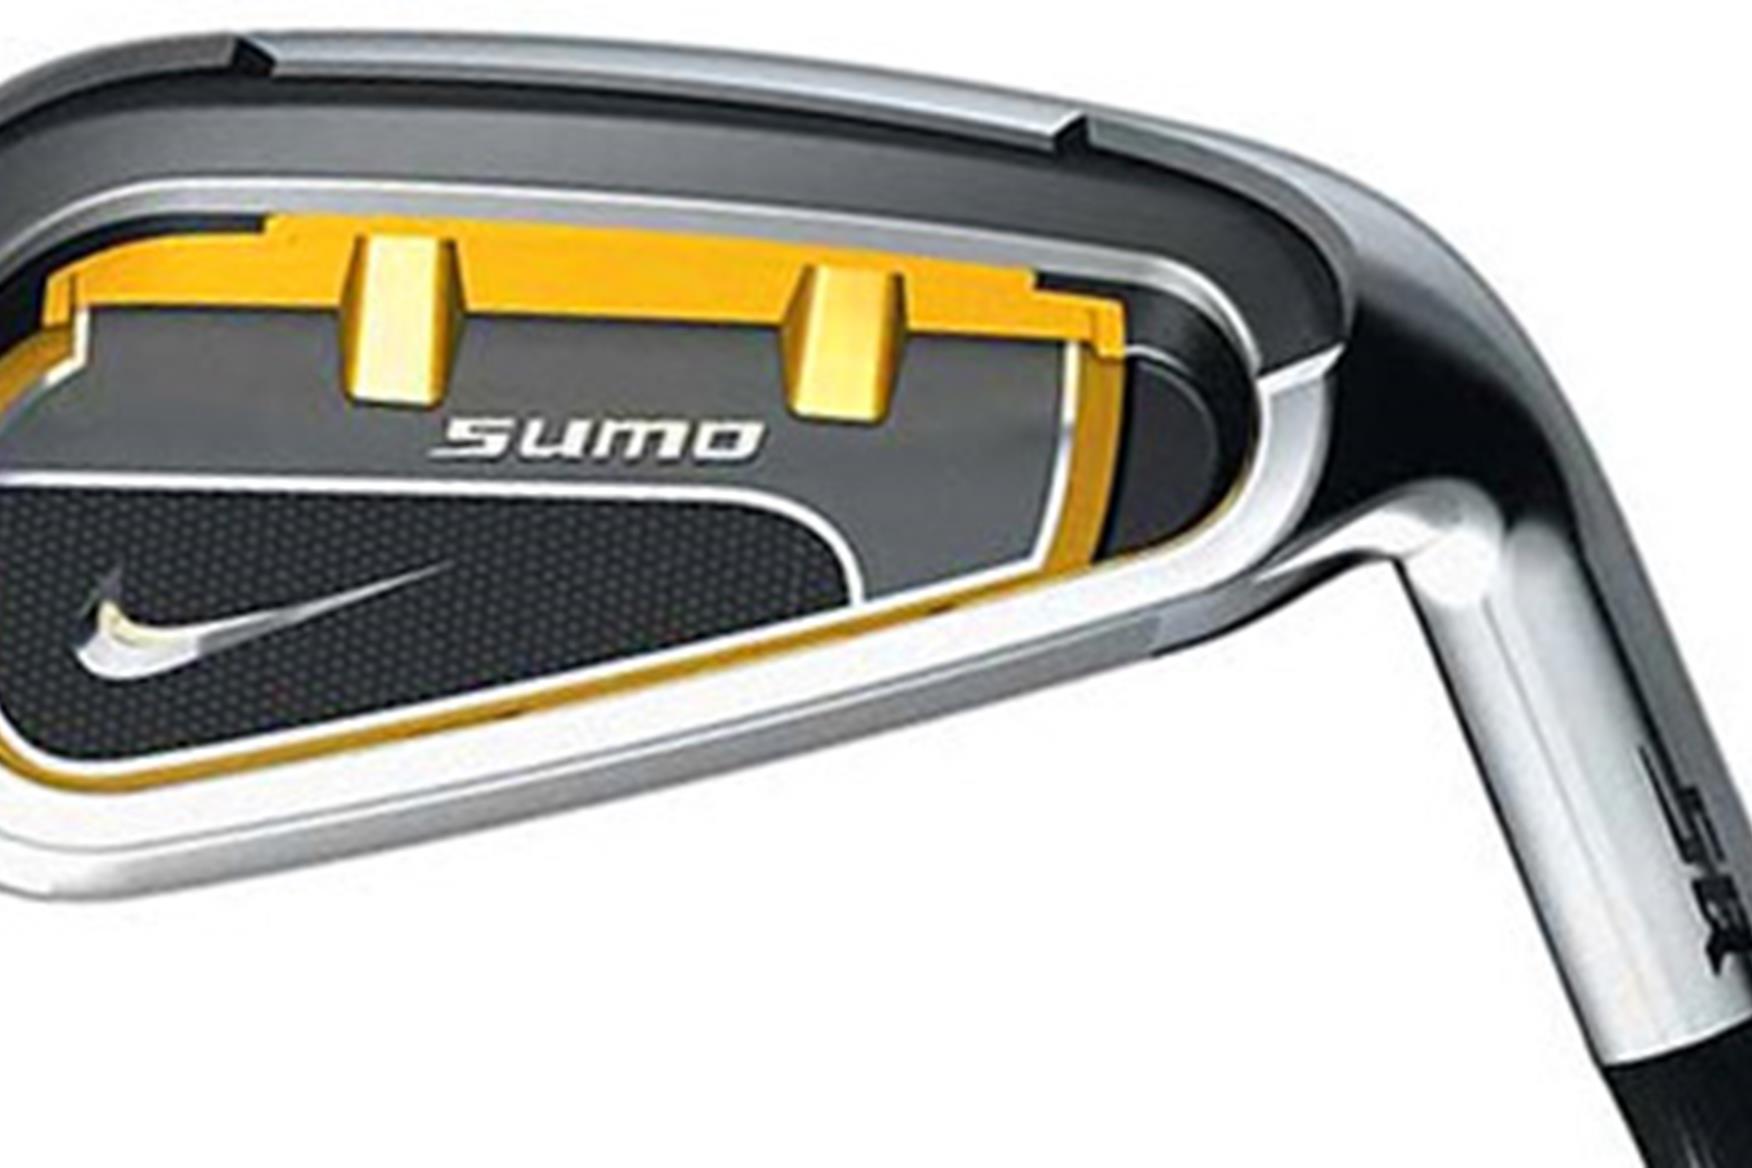 nike sq sumo irons review 